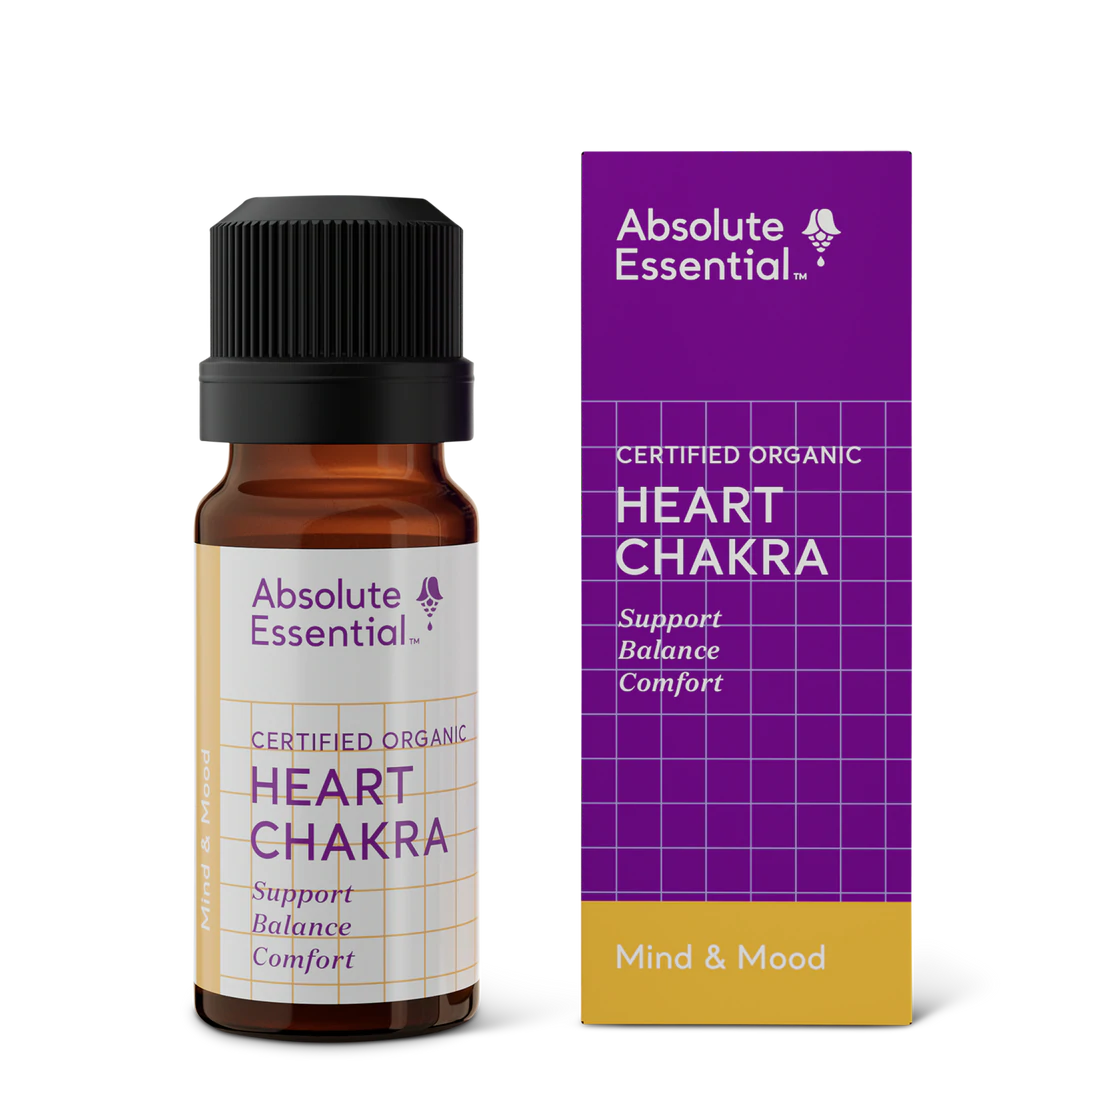 Absolute Essential Heart Chakra